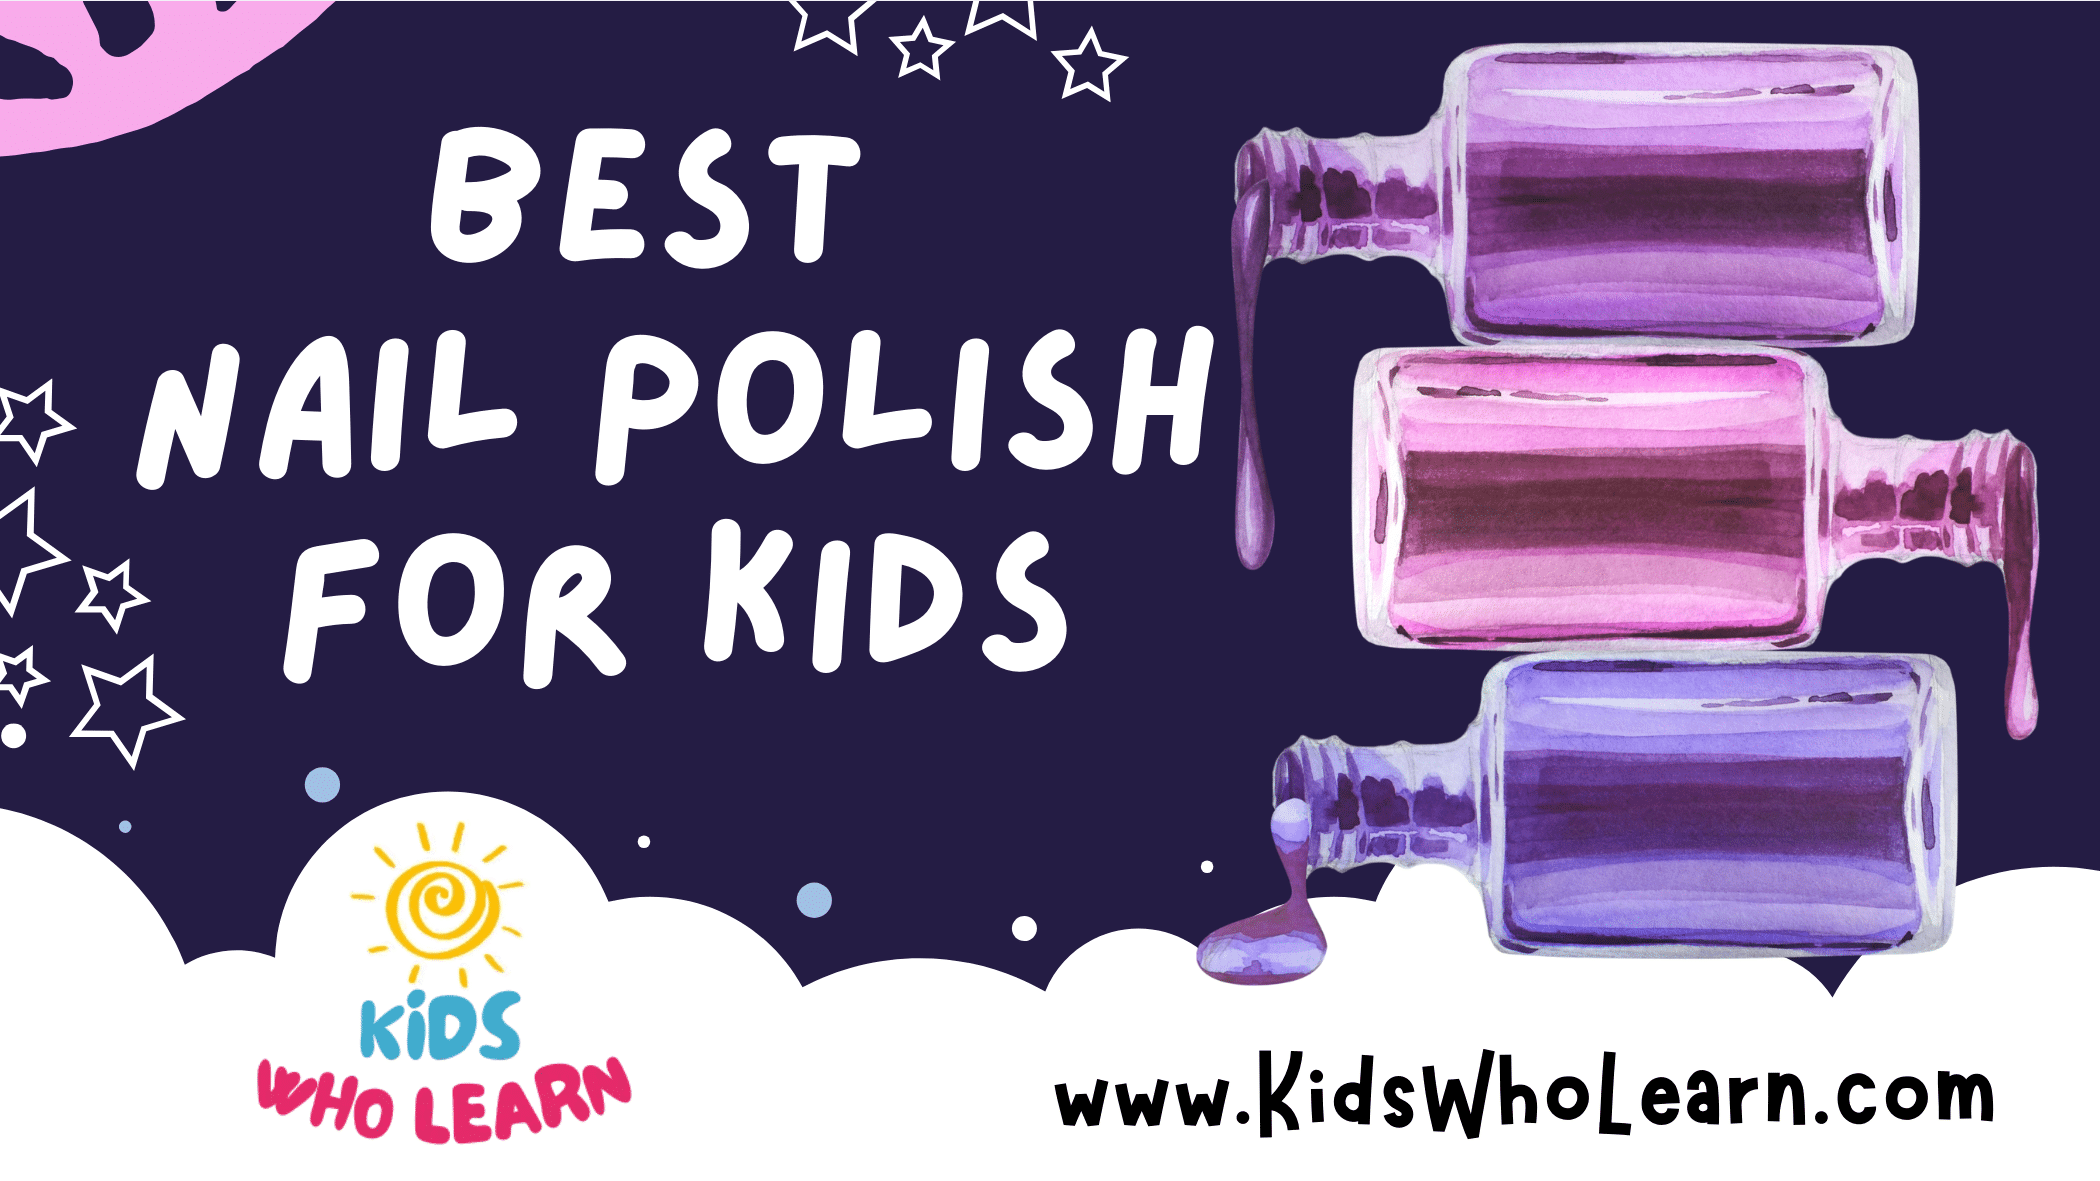 The Best Nail Polish for Kids: For Pretty Nails